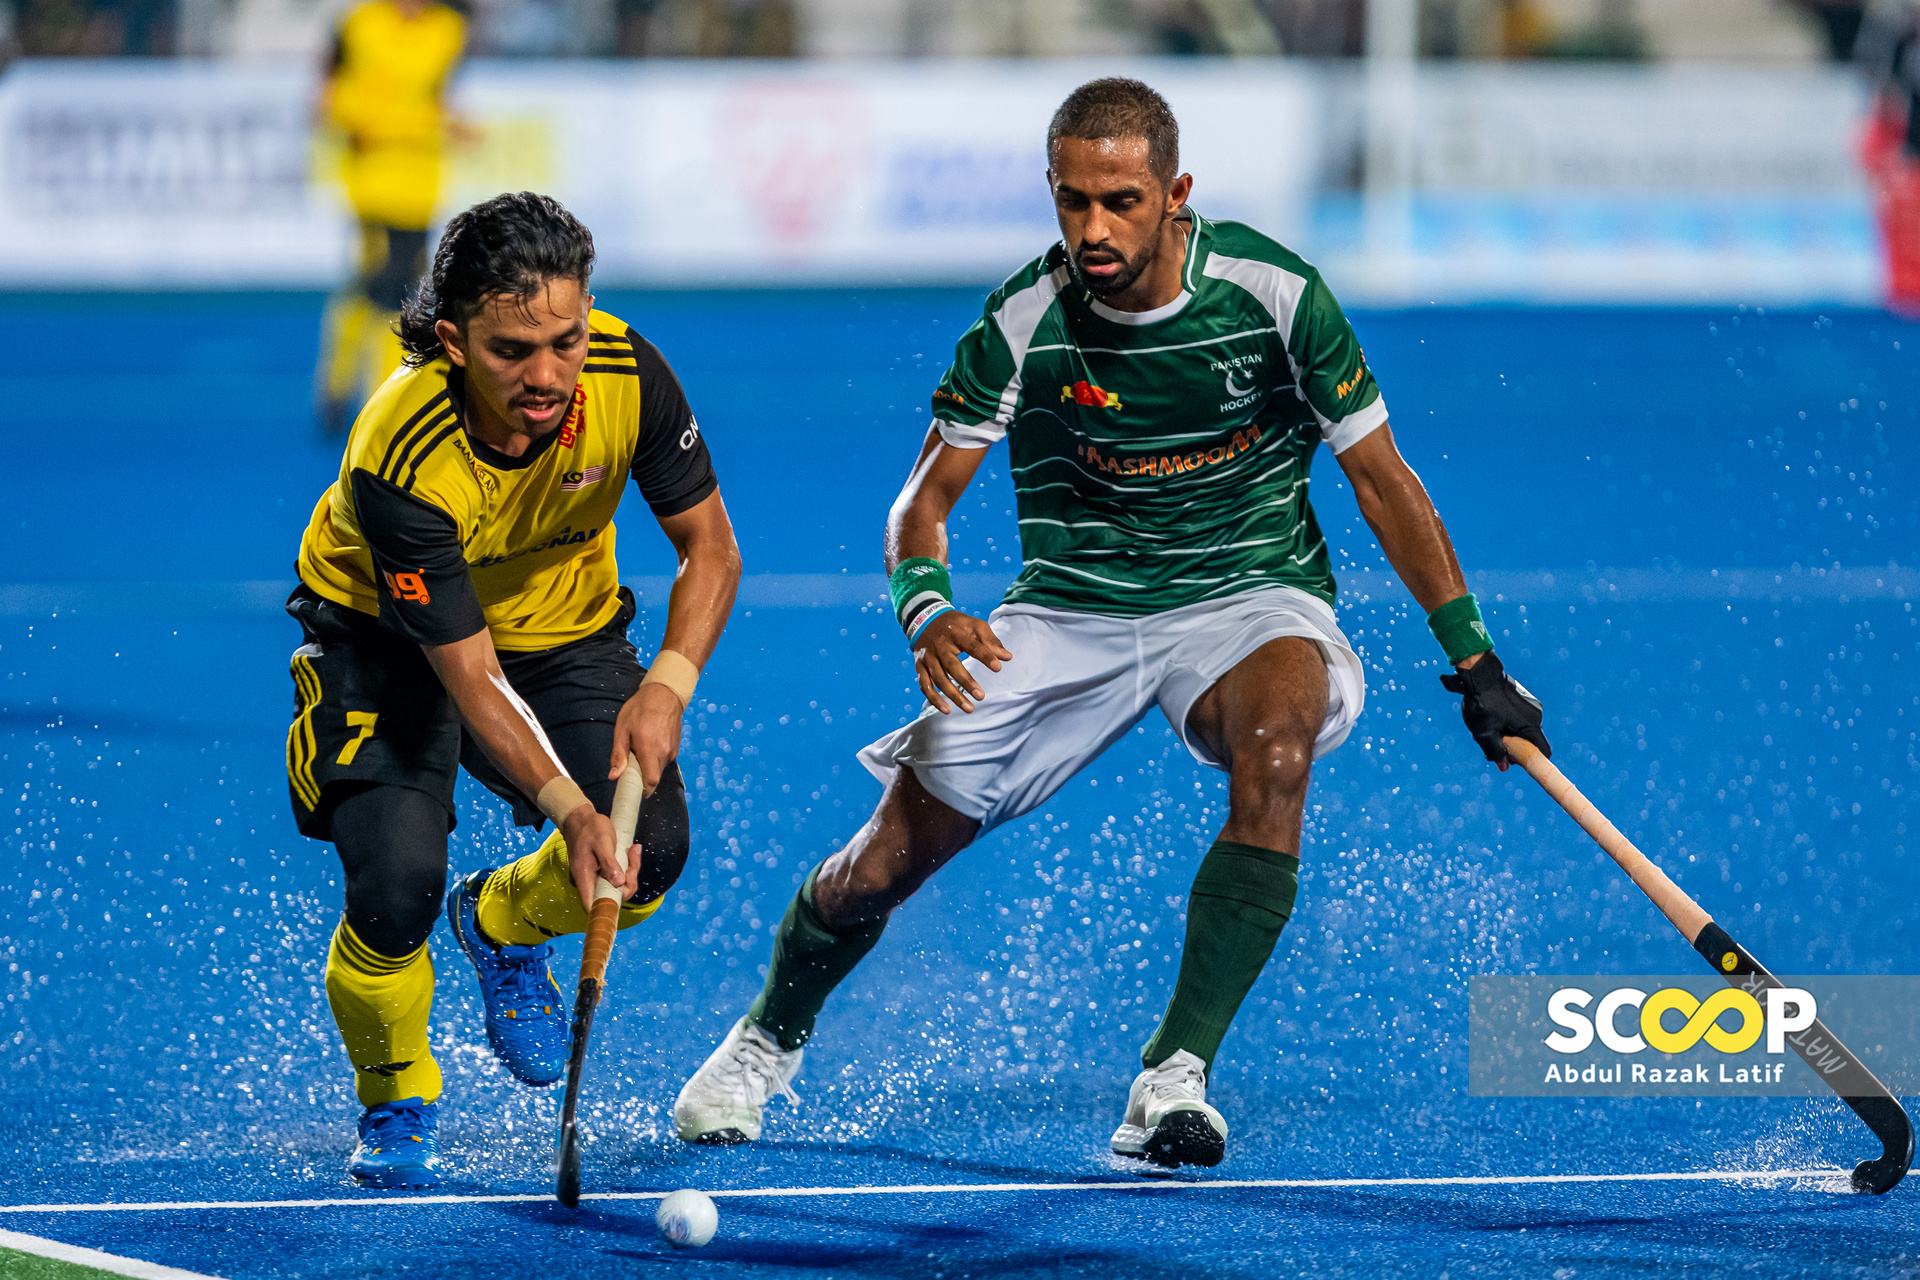 Sultan Azlan Shah Cup: attack only when necessary, Fitri Saari reminds squad